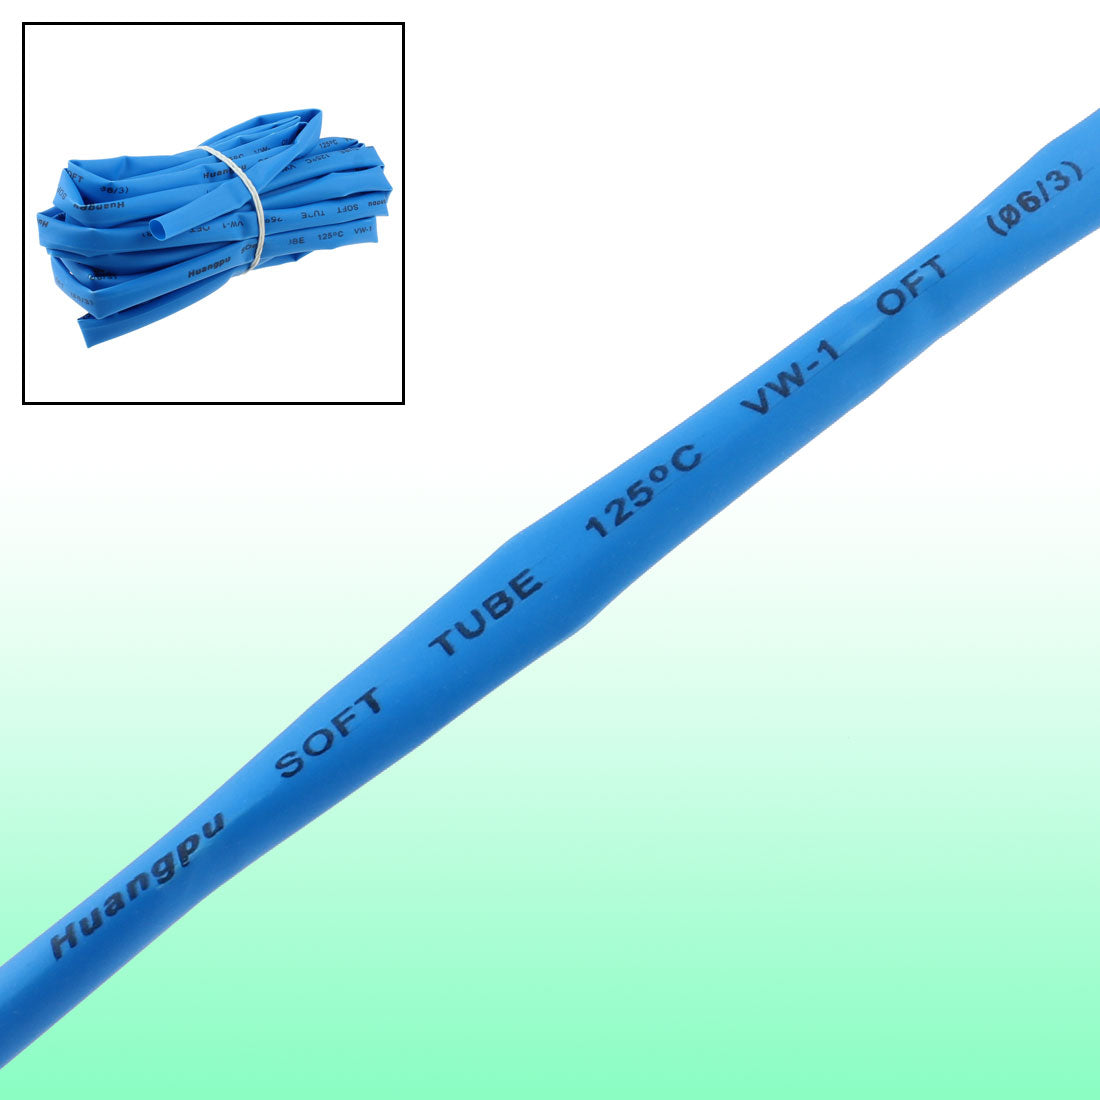 uxcell Uxcell 6mm Dia 10mm Flat width Ratio 2:1 Heat Shrinkable Tube Shrink Tubing 5M Blue